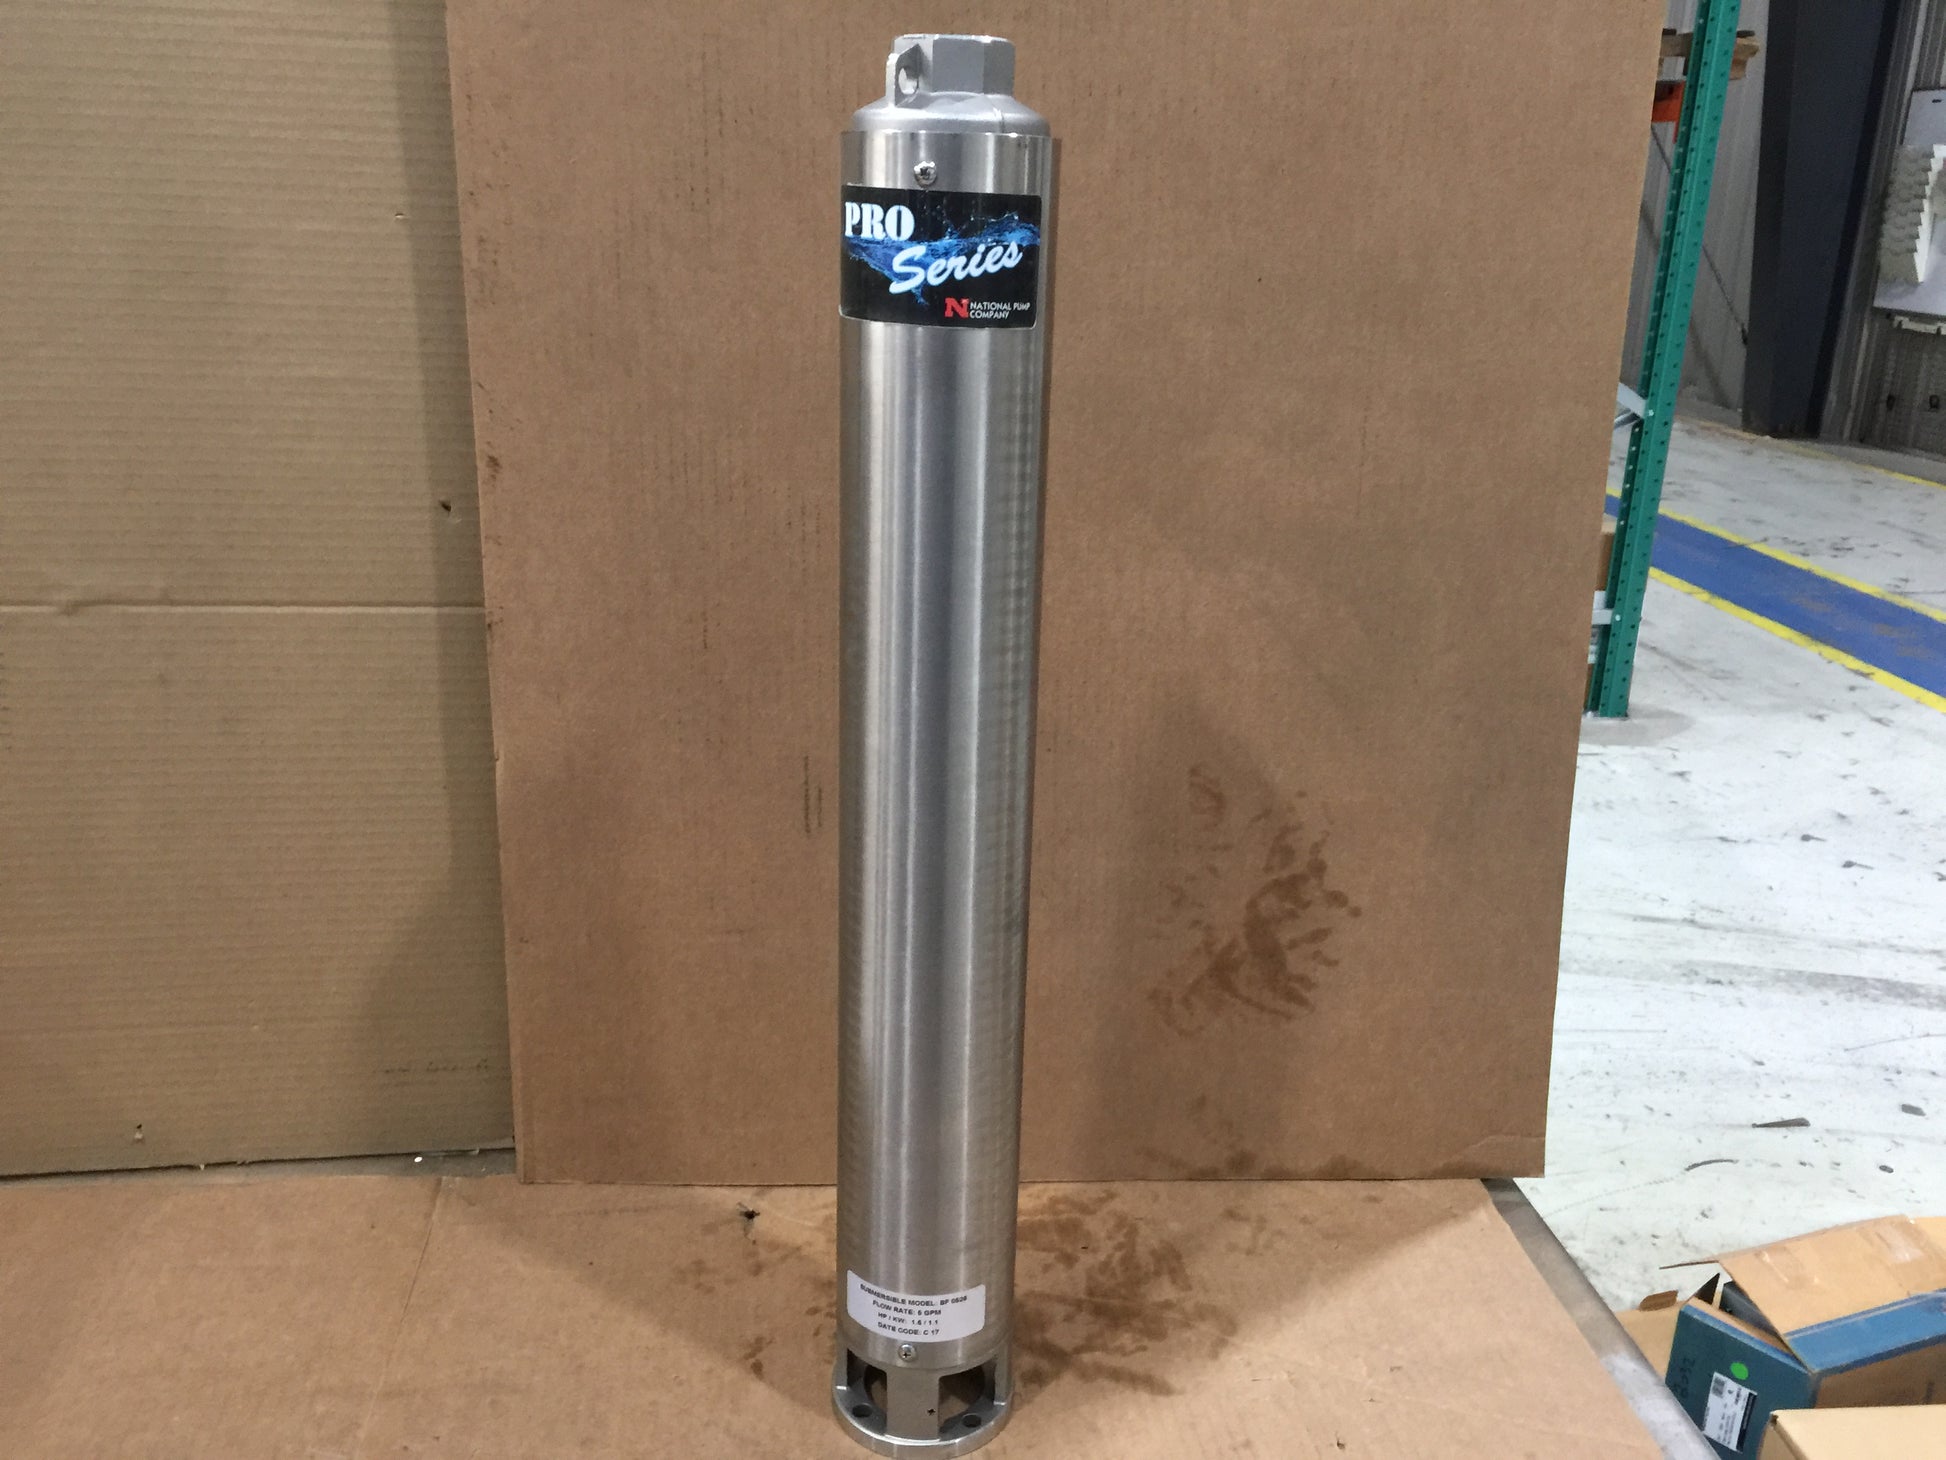 1-1/2 HP "PRO SERIES" SUBMERSIBLE BOOSTER PUMP; 5 GPM, 1 PHASE, 26 STAGES